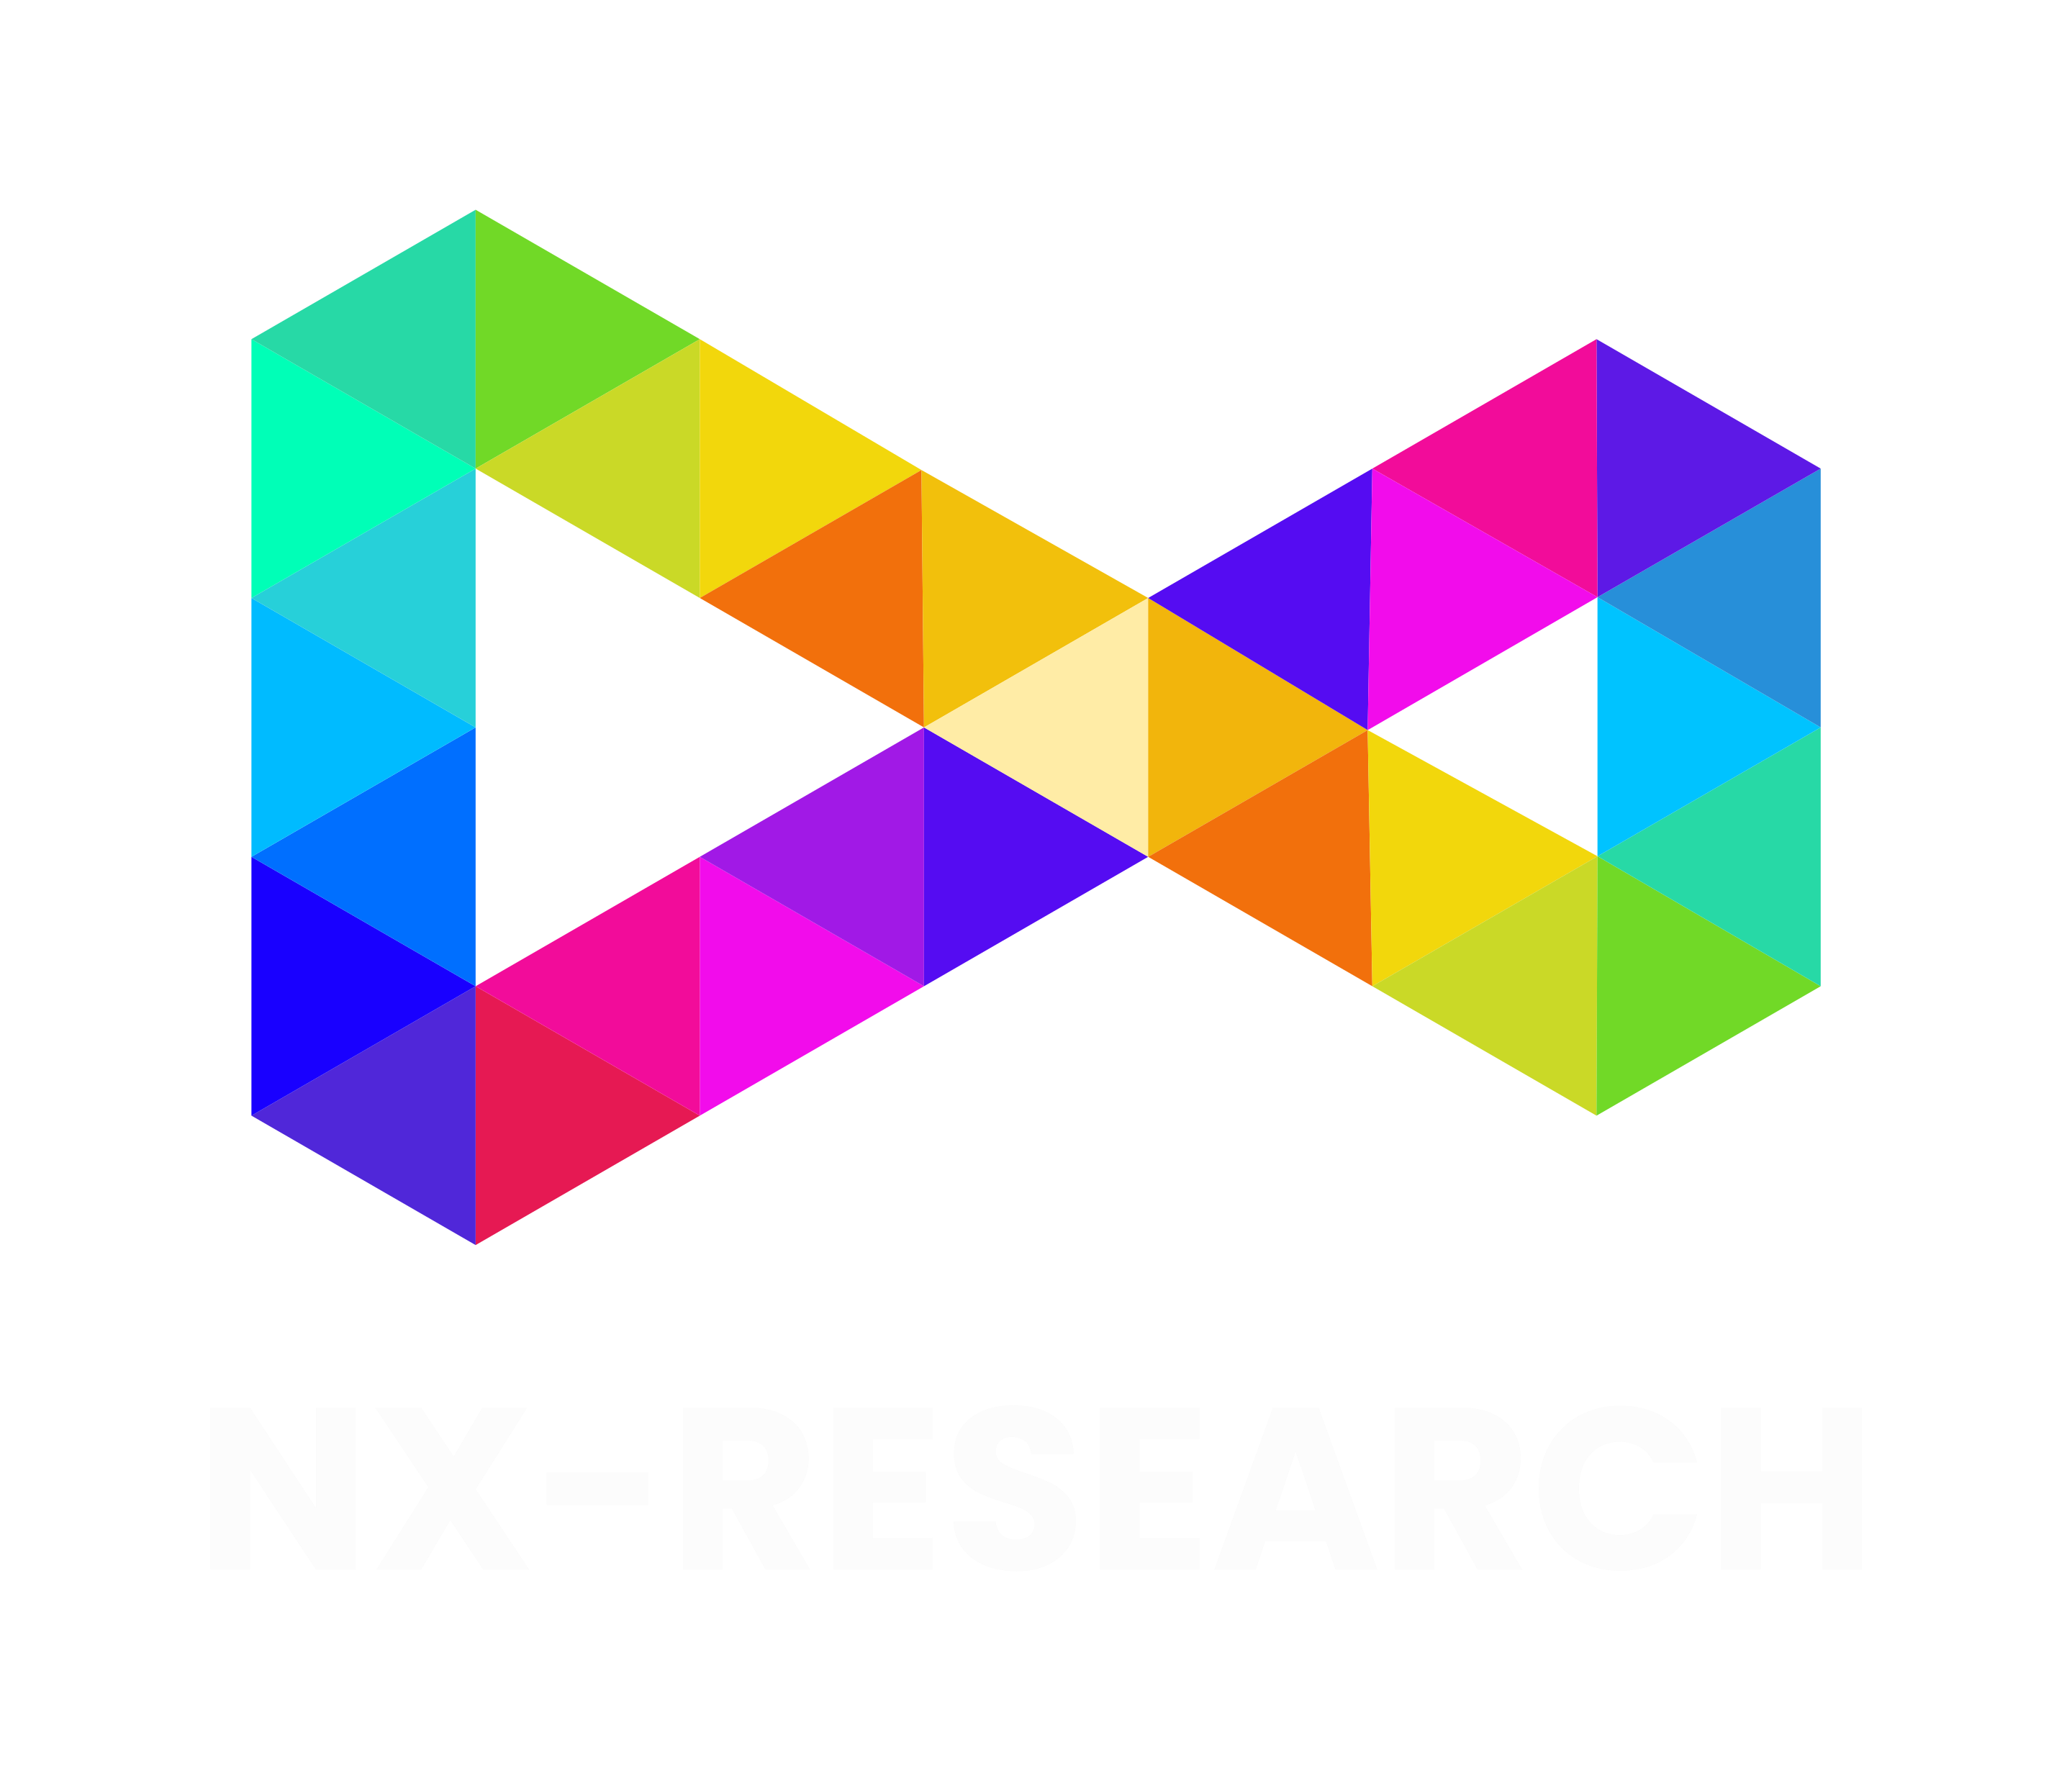 NX-RESEARCH